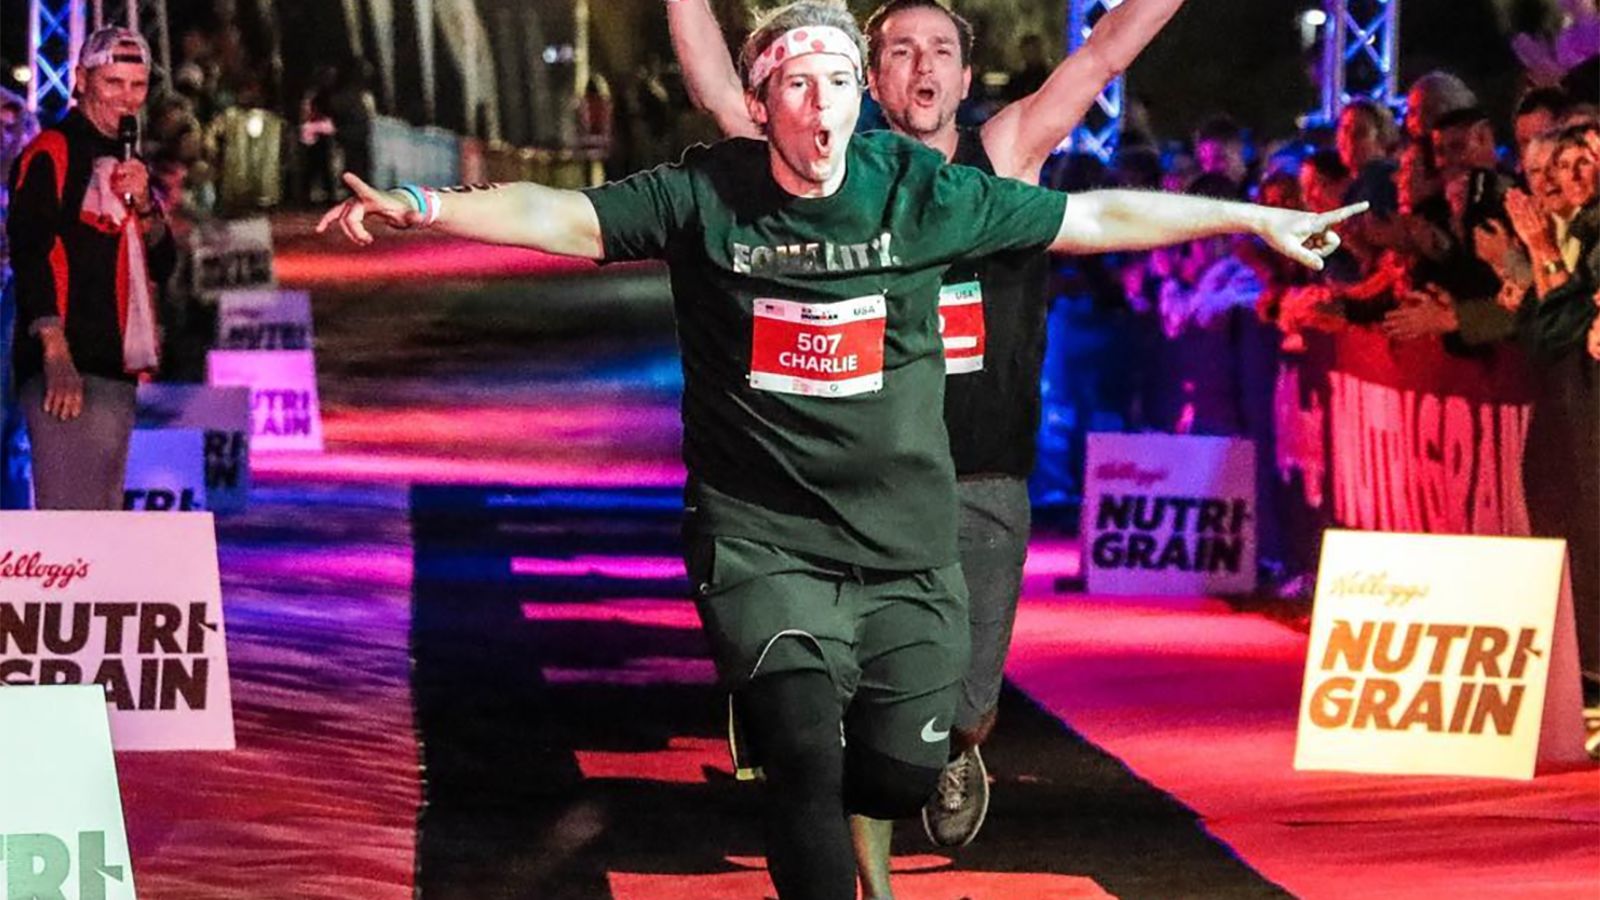 Jabaley completes his first Ironman in New Zealand.